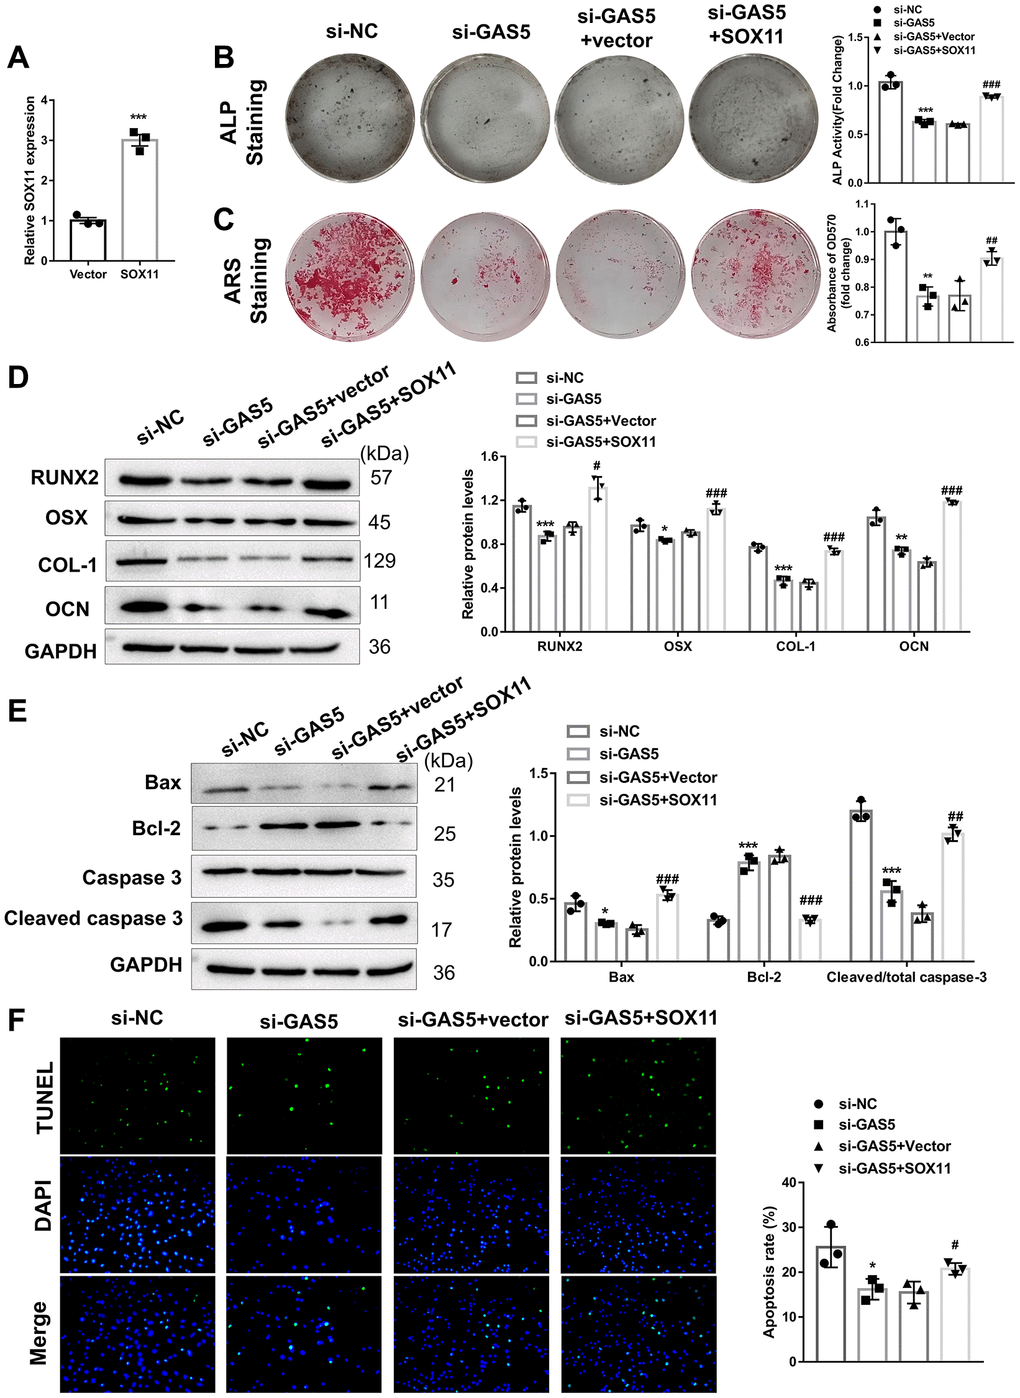 The role of GAS5 in the apoptosis and osteogenic differentiation of AFs was mediated by SOX11. (A) AFs were transfected with SOX11 overexpression or an empty vector, and the transfection efficacy was detected using qRT-PCR (n = 3). Next, AFs were transfected with or without si-GAS5 plasmid alone or with the SOX11 overexpression vector. (B) ALP and (C) ARS staining assays were used to evaluate the osteogenic differentiation level (n = 3). (D) The osteogenic differentiation-related markers were detected using western blotting (n = 3). (E) The apoptosis-related protein levels were measured using western blotting (n = 3). (F) TUNEL staining assay was employed to evaluate the apoptosis of AFs (n = 3). (*p **p ***p #p ##p ###p 